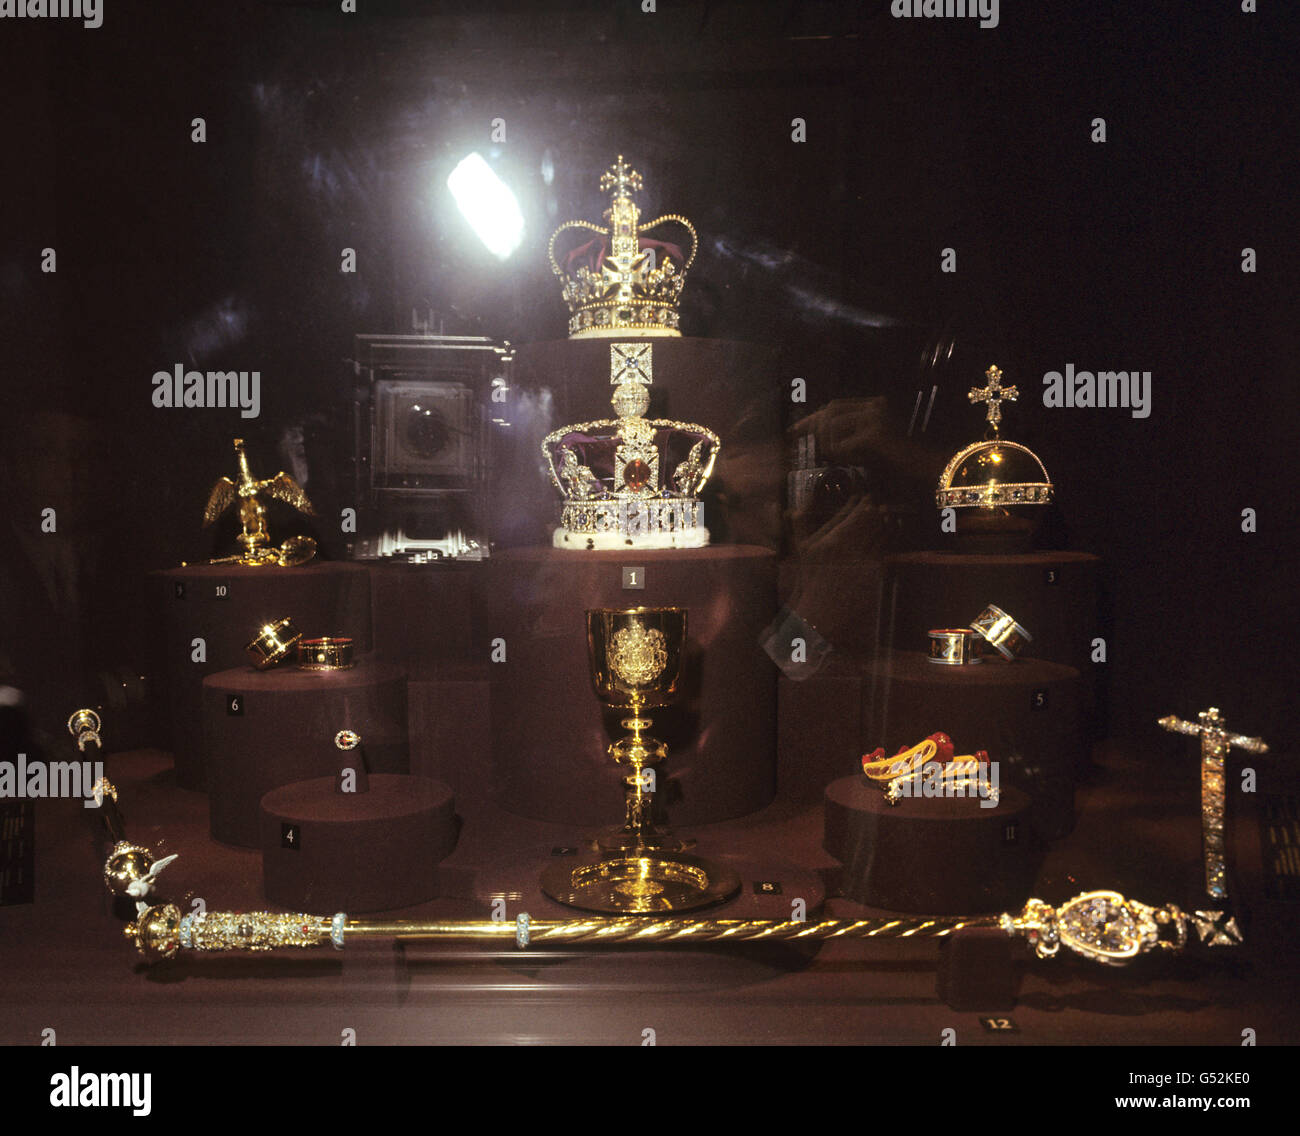 The Imperial State Crown, St. Edwards Crown, the Sovereign Orb, The Golden Spurs, Bracelets and the Jewel Sword of State are alll exhibited at the new Crown Jewel Imperial House at The Tower of London. Stock Photo